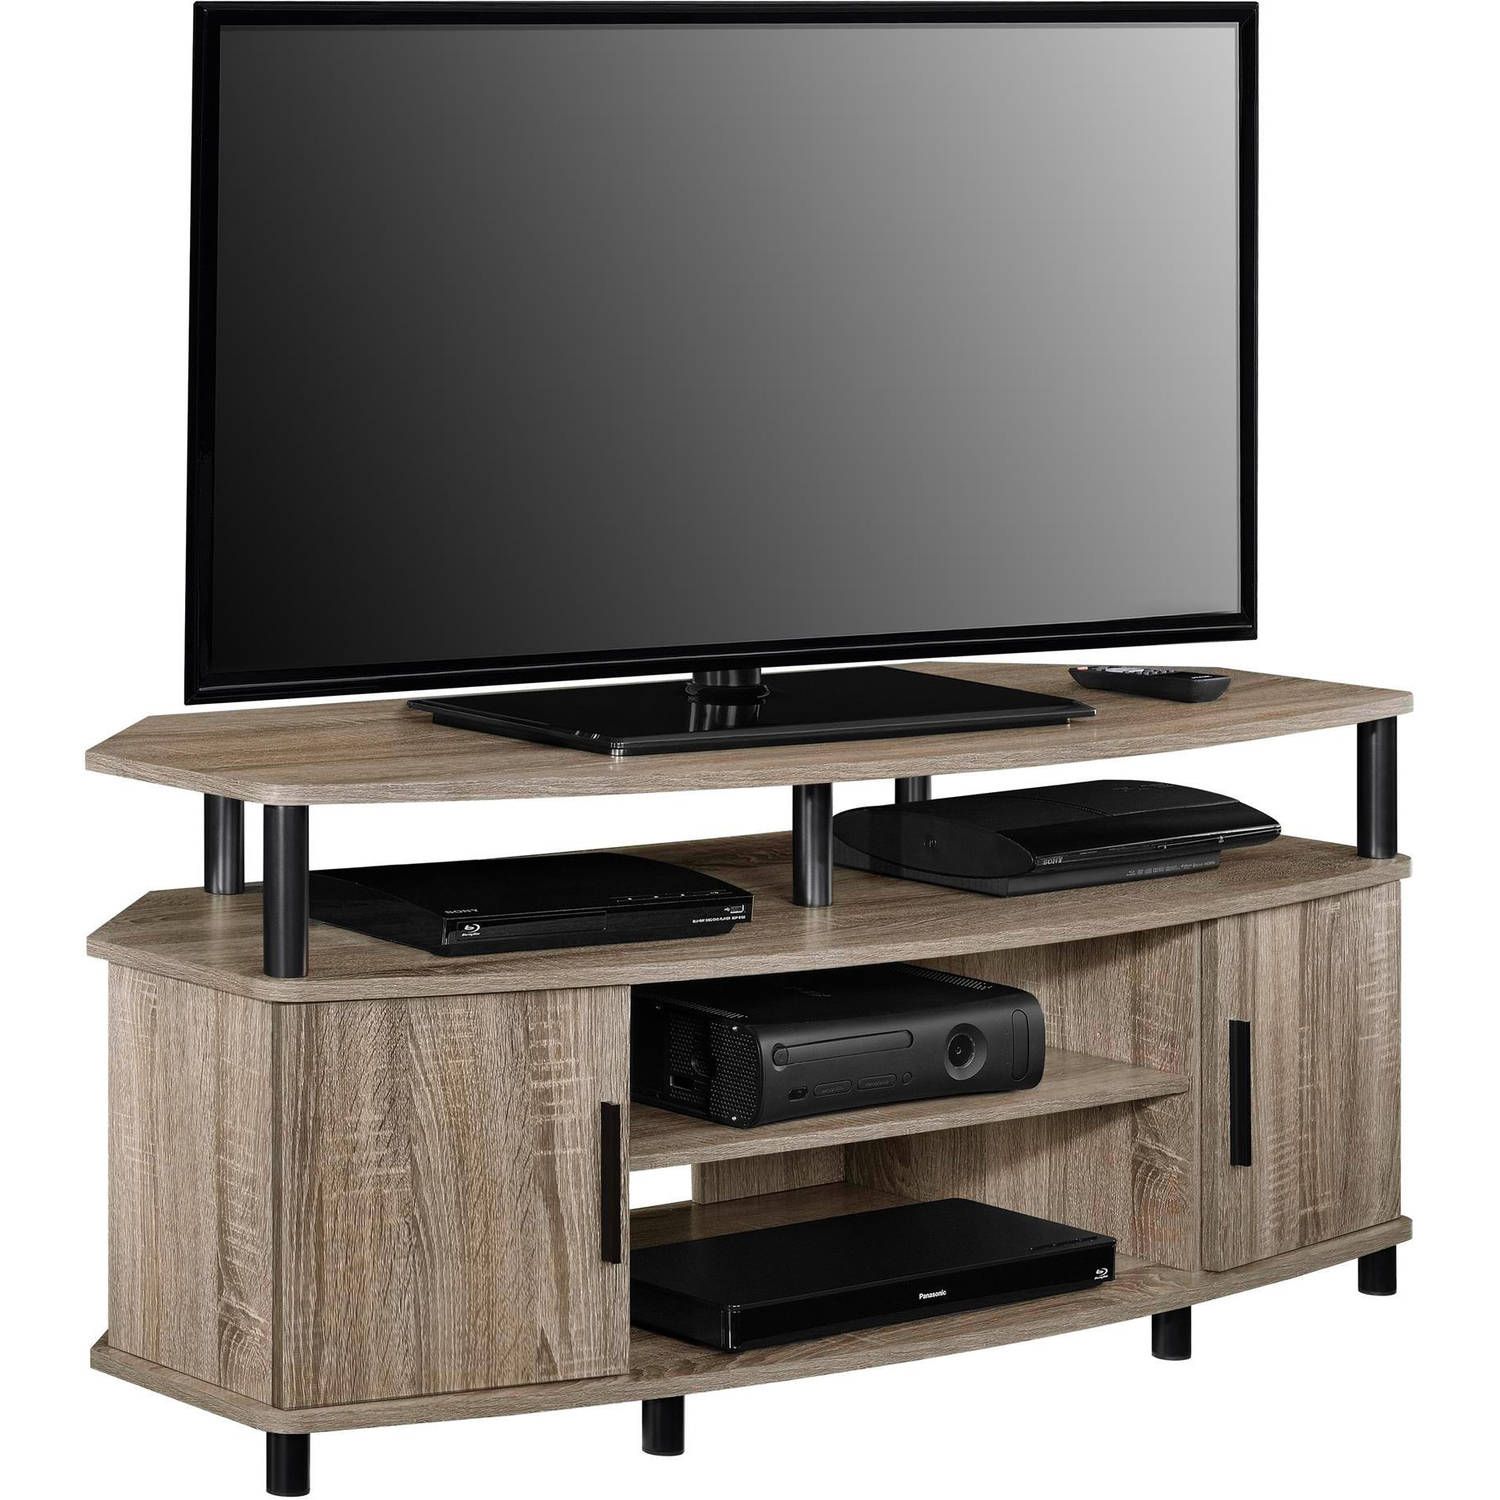 Corner Tv Stand Media Console For Flat Screens Sonoma Oak Throughout Corner Tv Cabinets For Flat Screens (View 1 of 15)